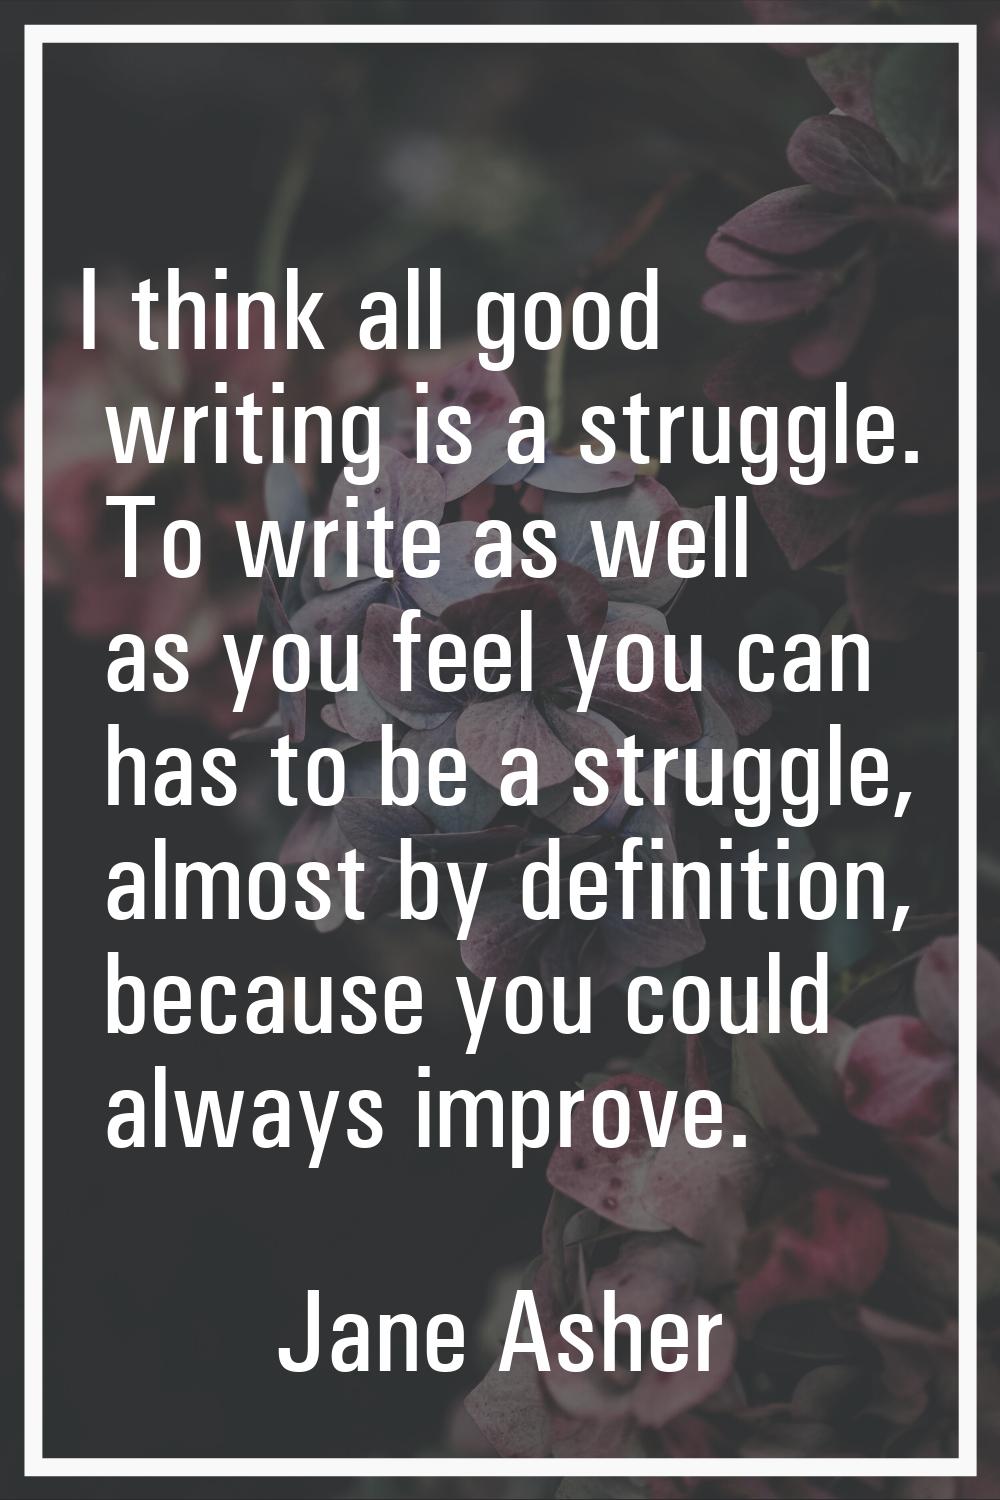 I think all good writing is a struggle. To write as well as you feel you can has to be a struggle, 